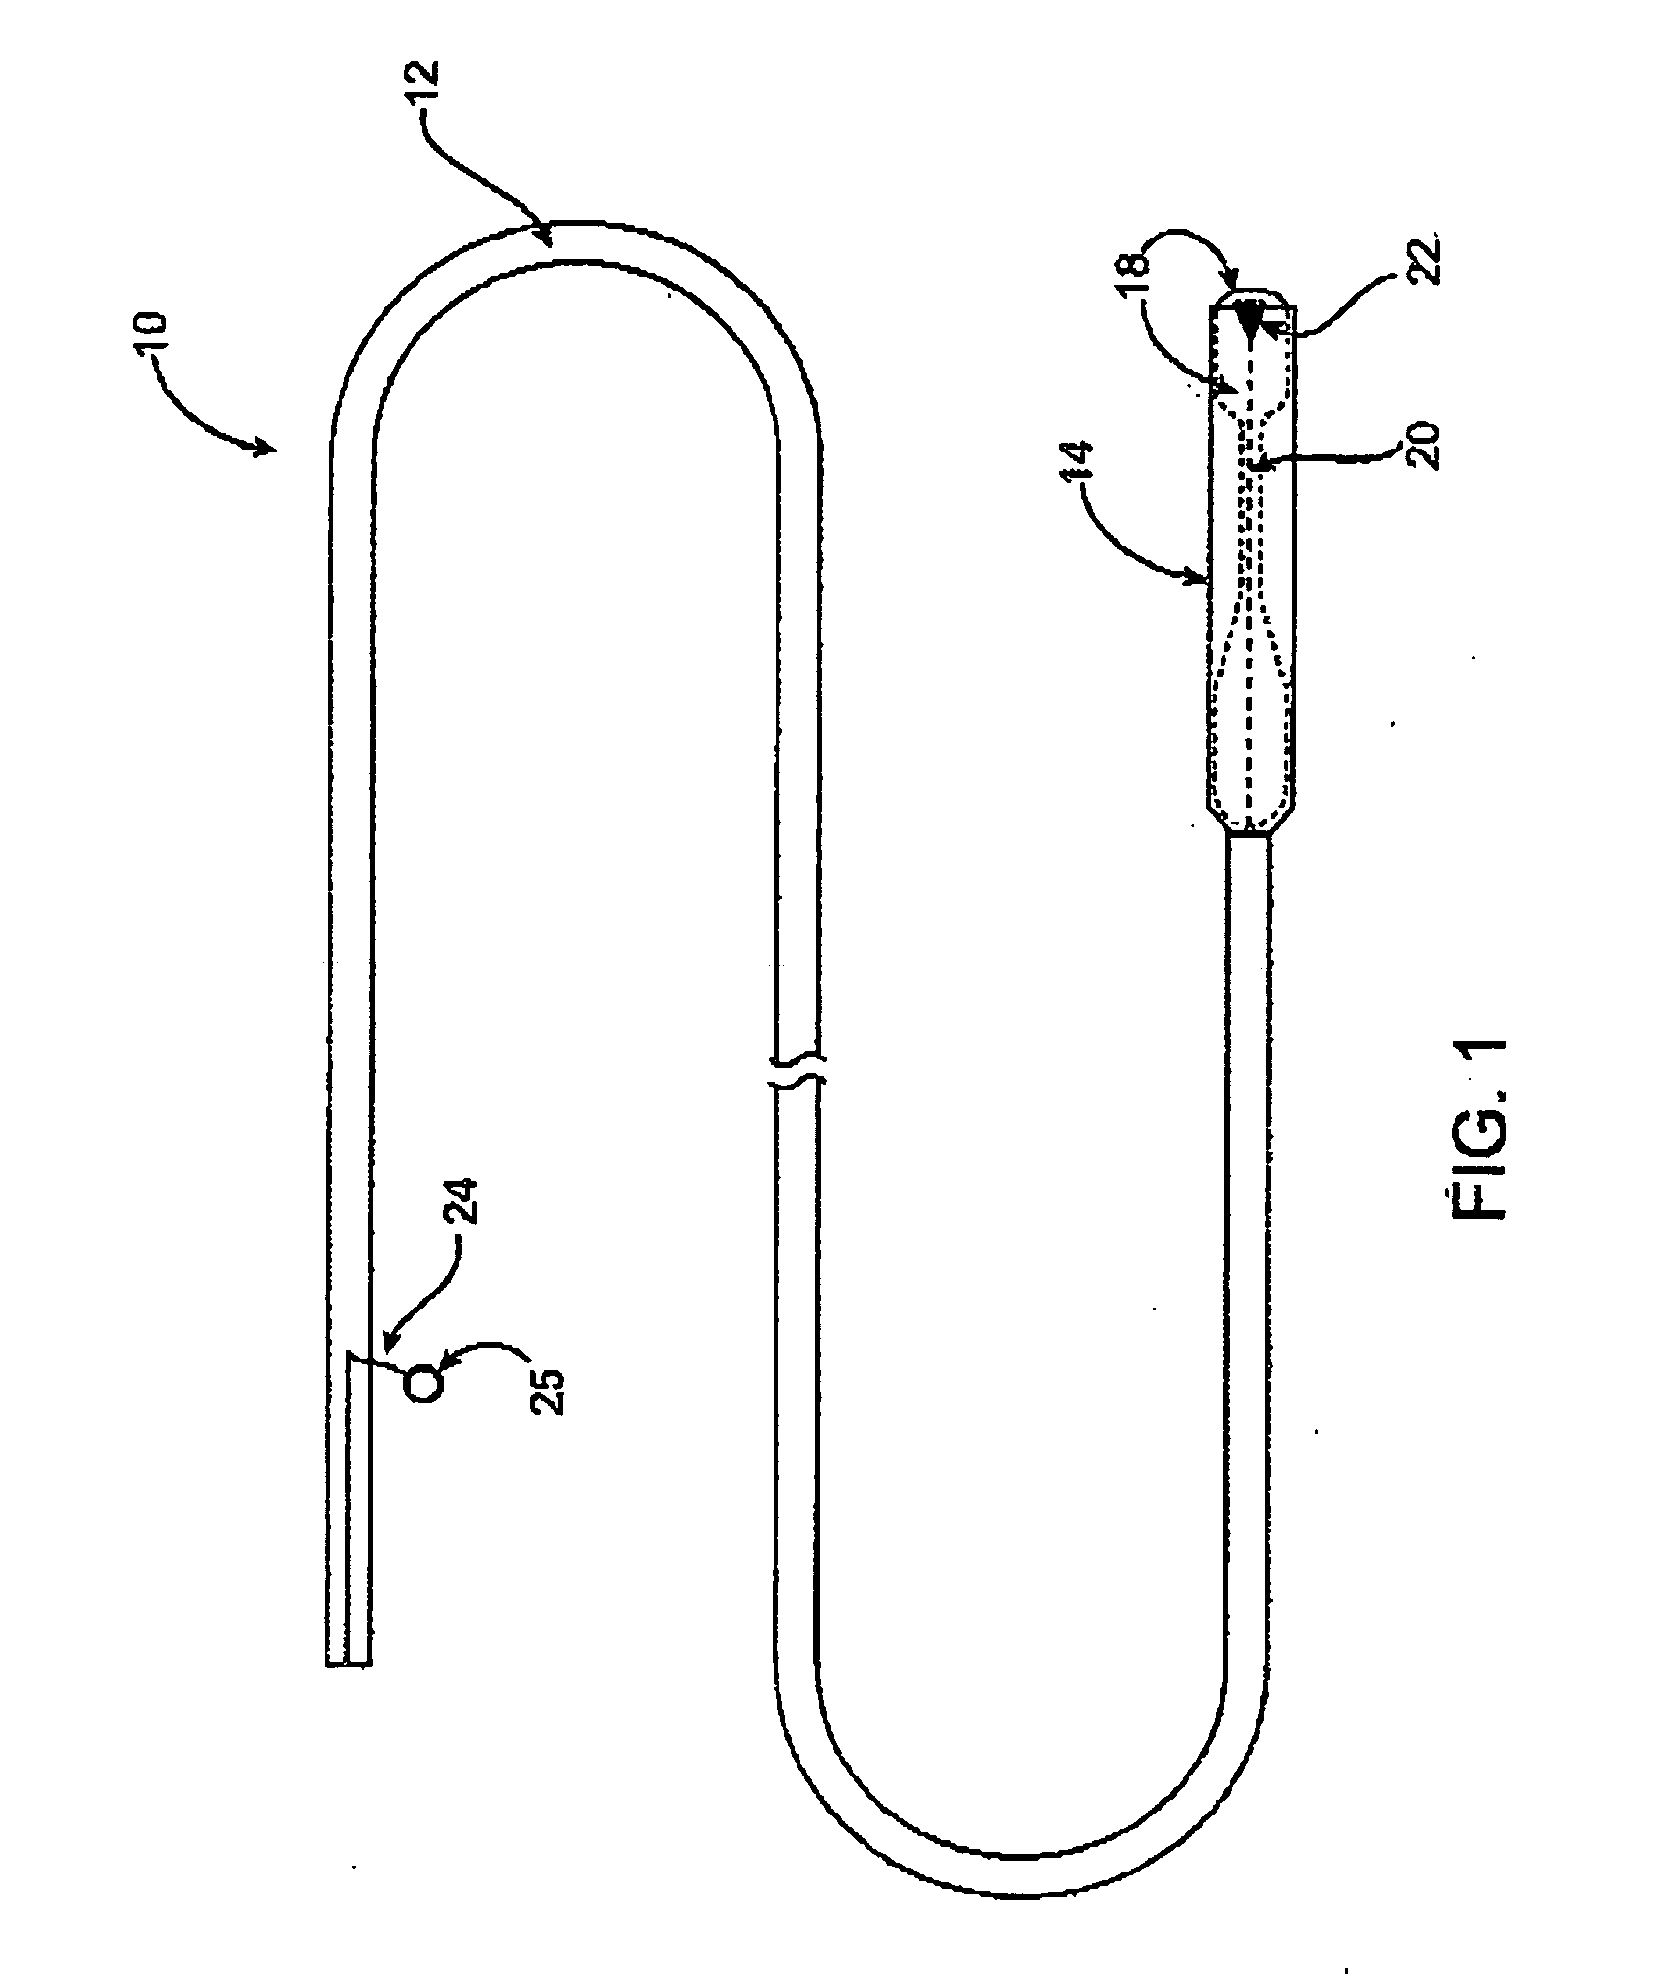 Medical device delivery catheter